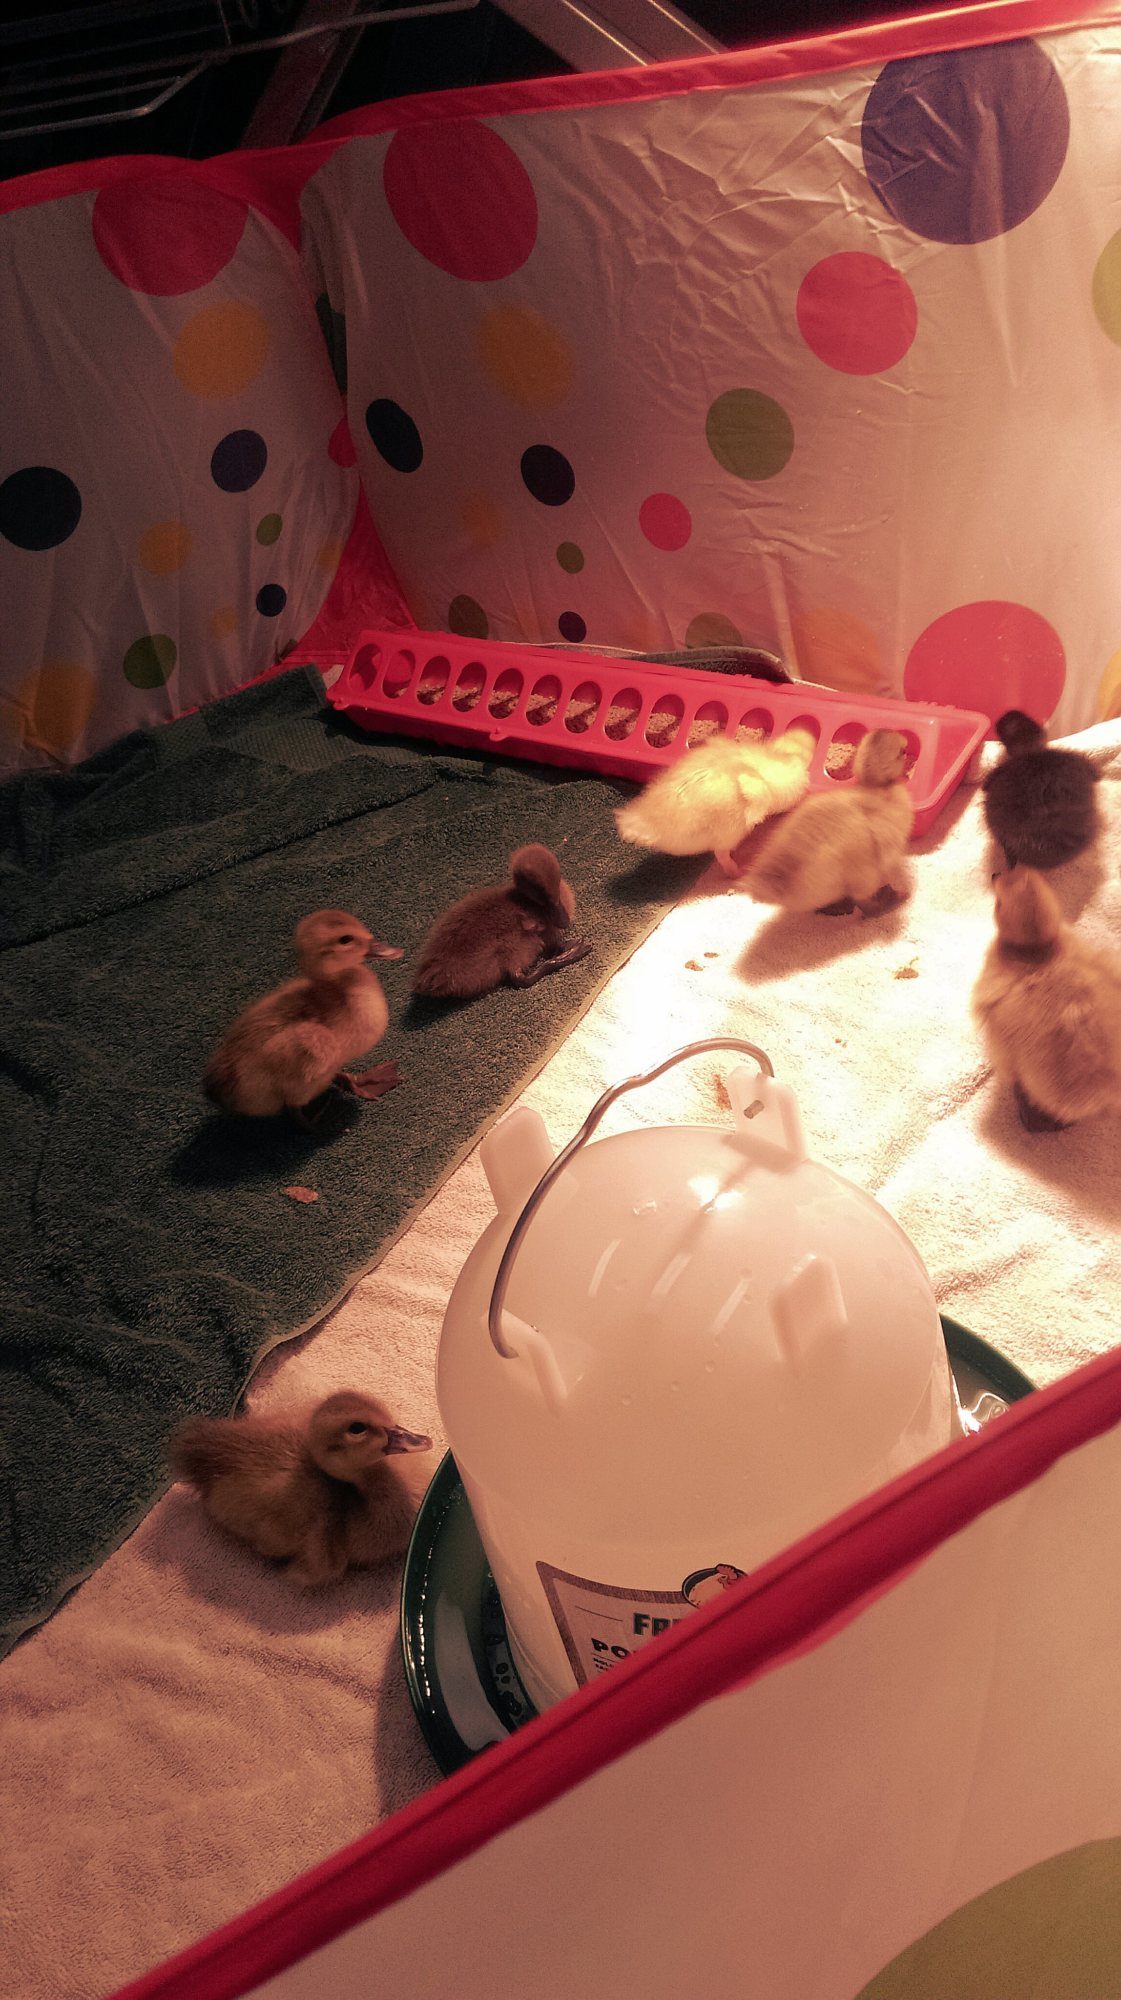 Their little polka dot brooder is so happy :)